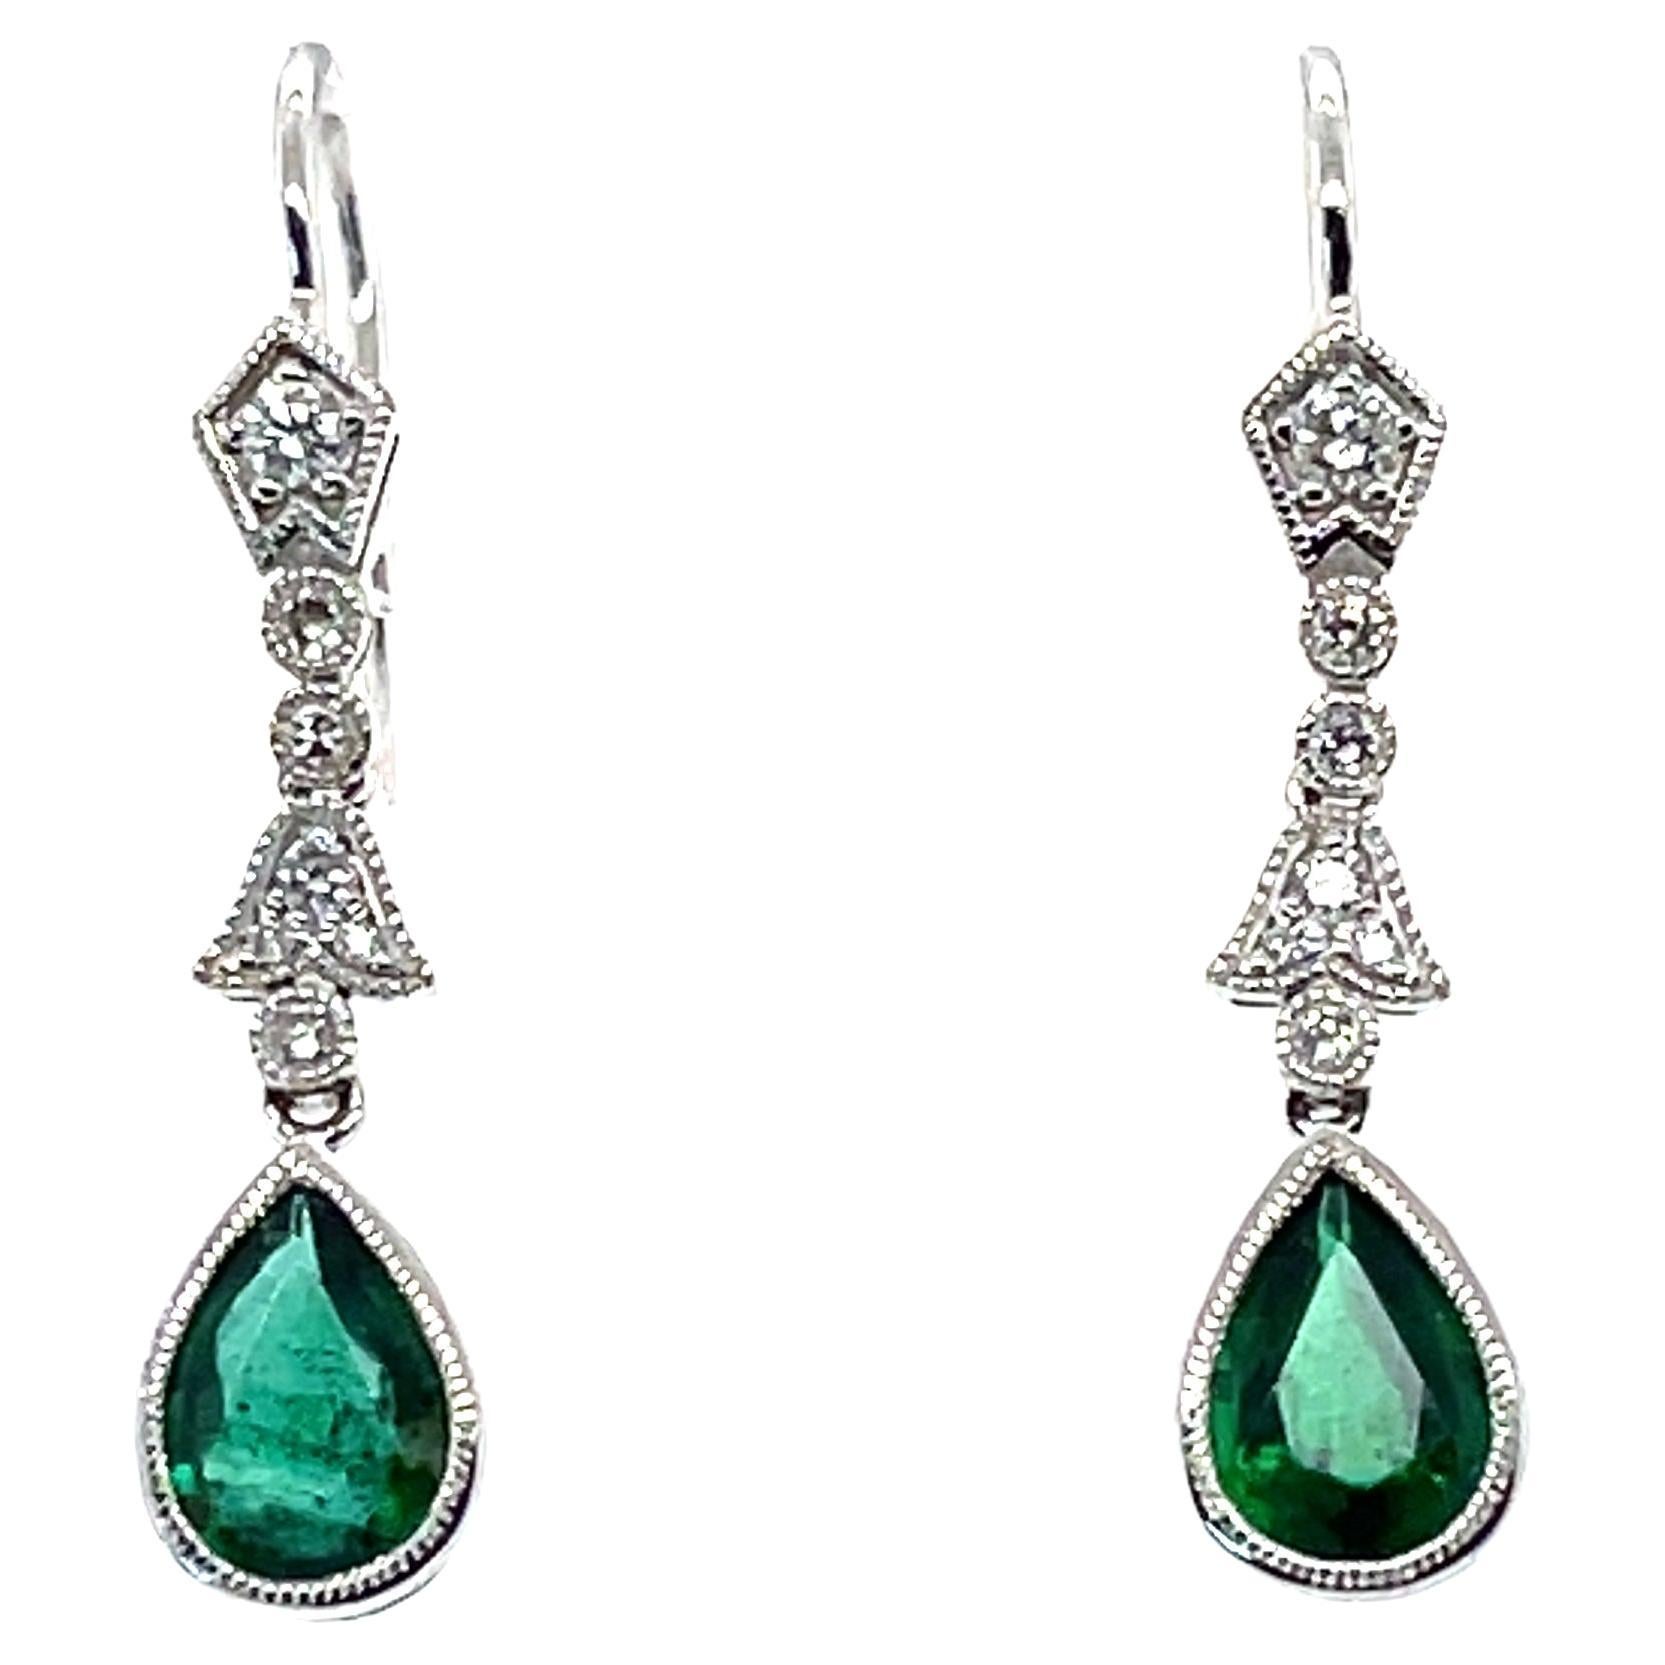 18ct White Gold 0.66ct Emerald and Diamond Earrings